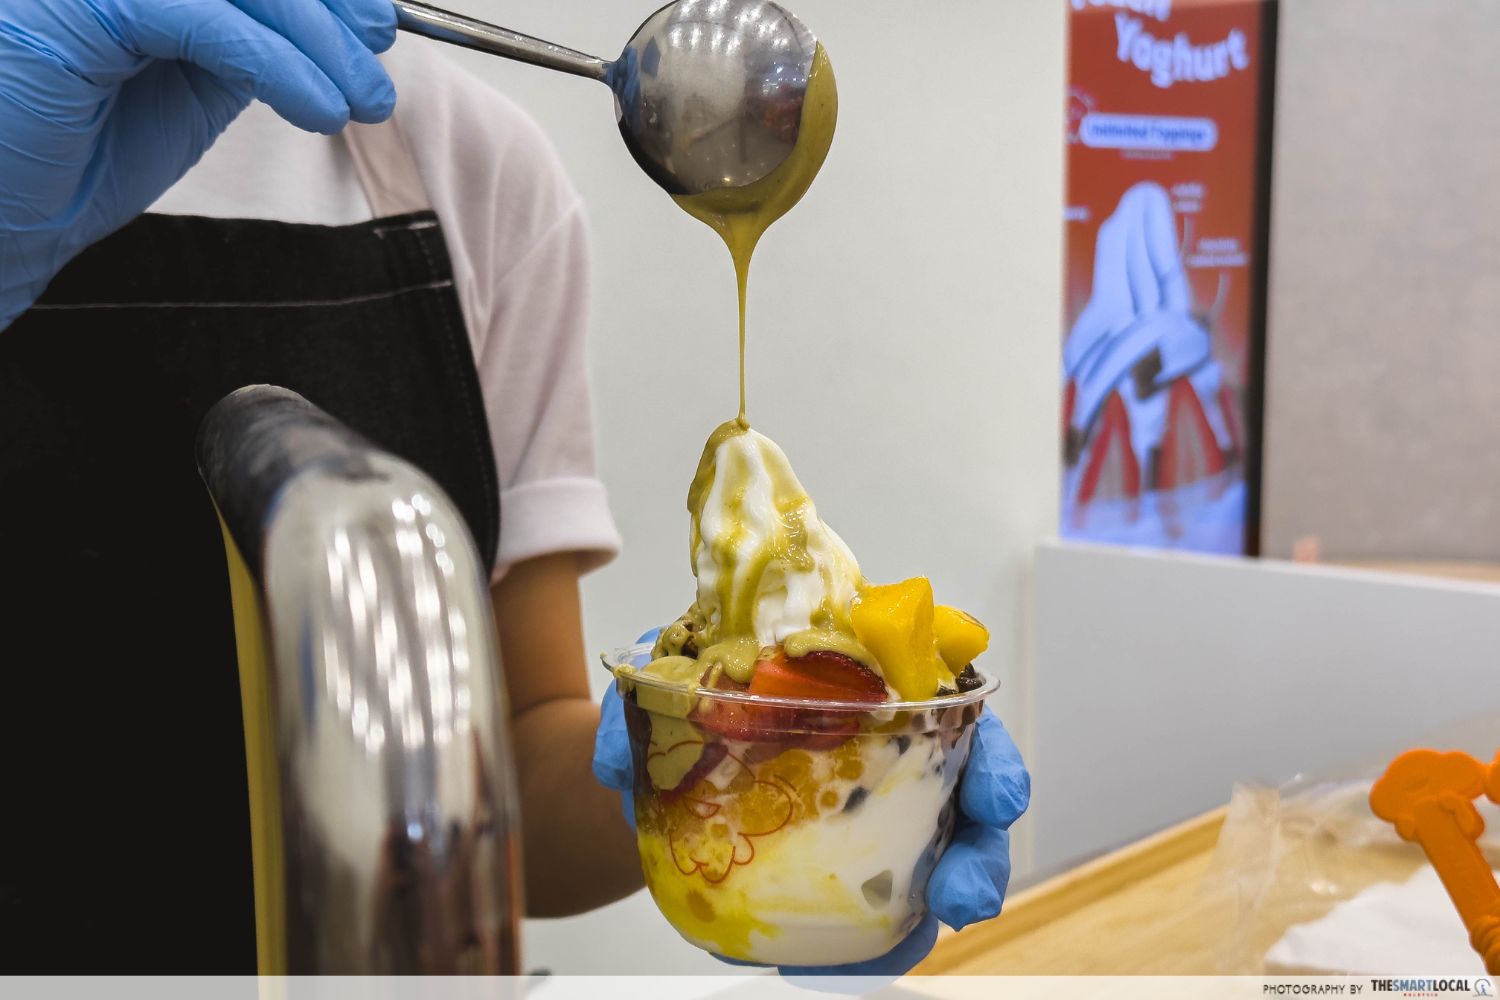 pistachio sauce is drizzled onto a cup of froyo stuffed with toppings such as fruits, popping pearls, etc.